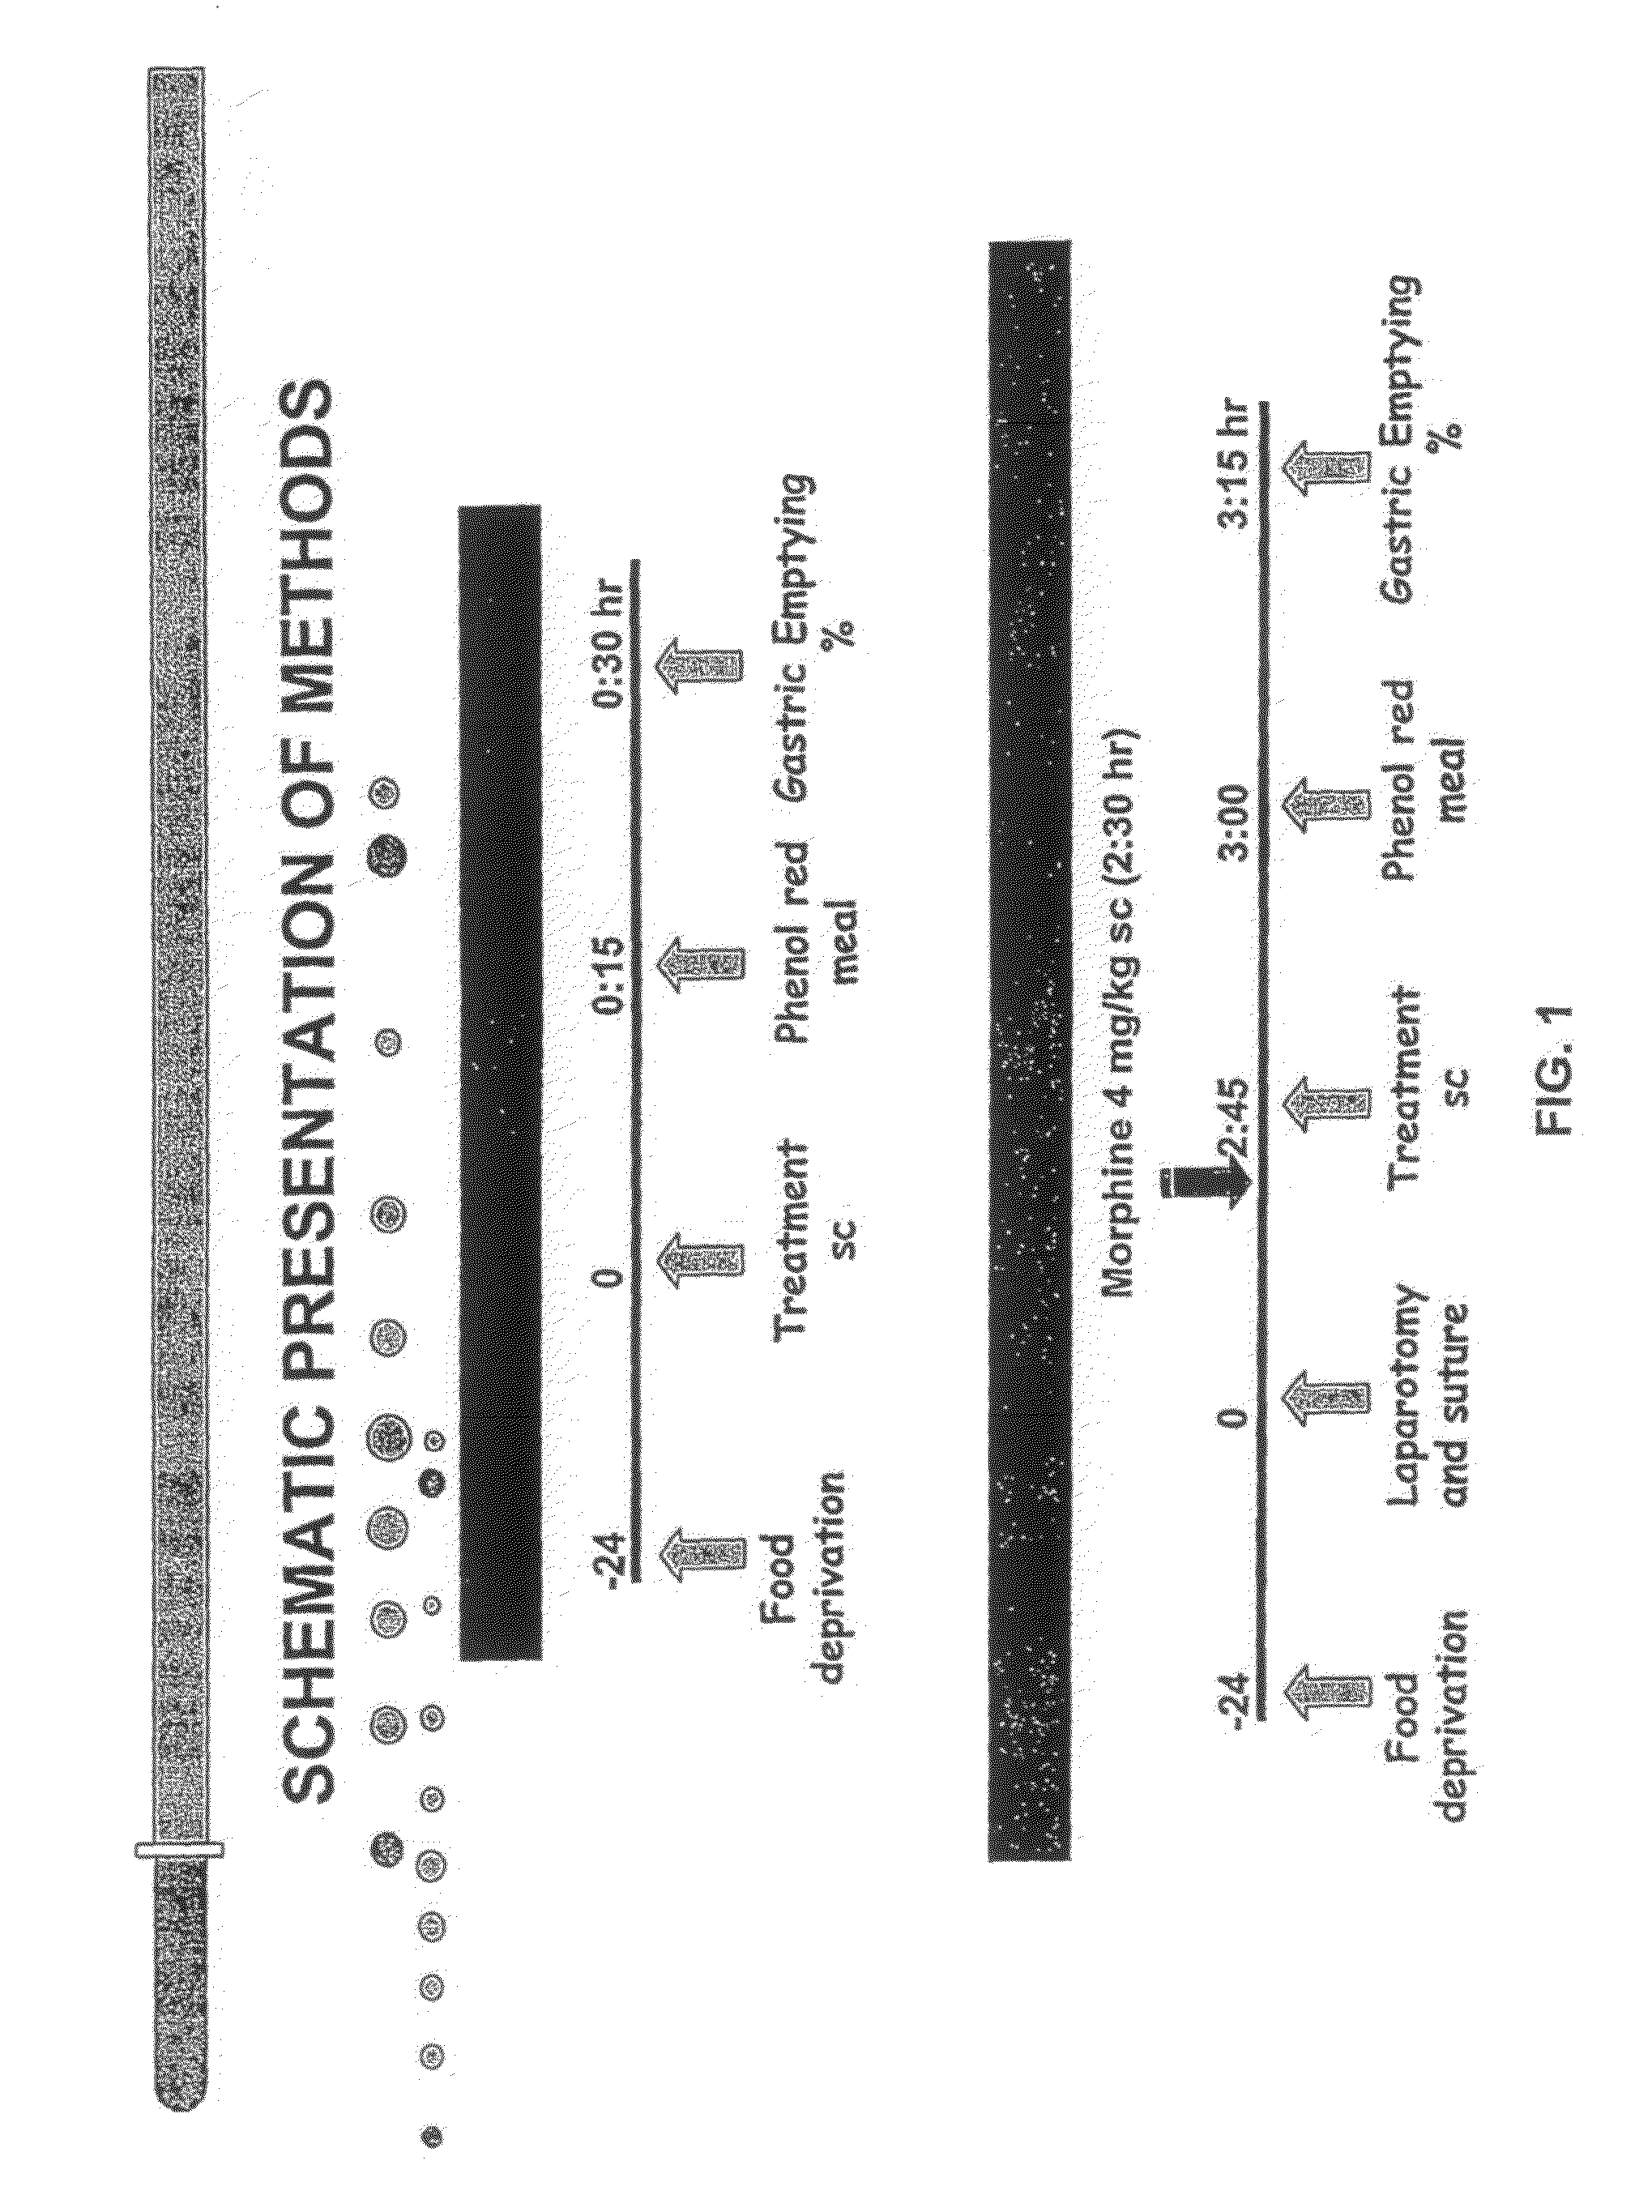 Compositions and methods for stimulating gastrointestinal motility